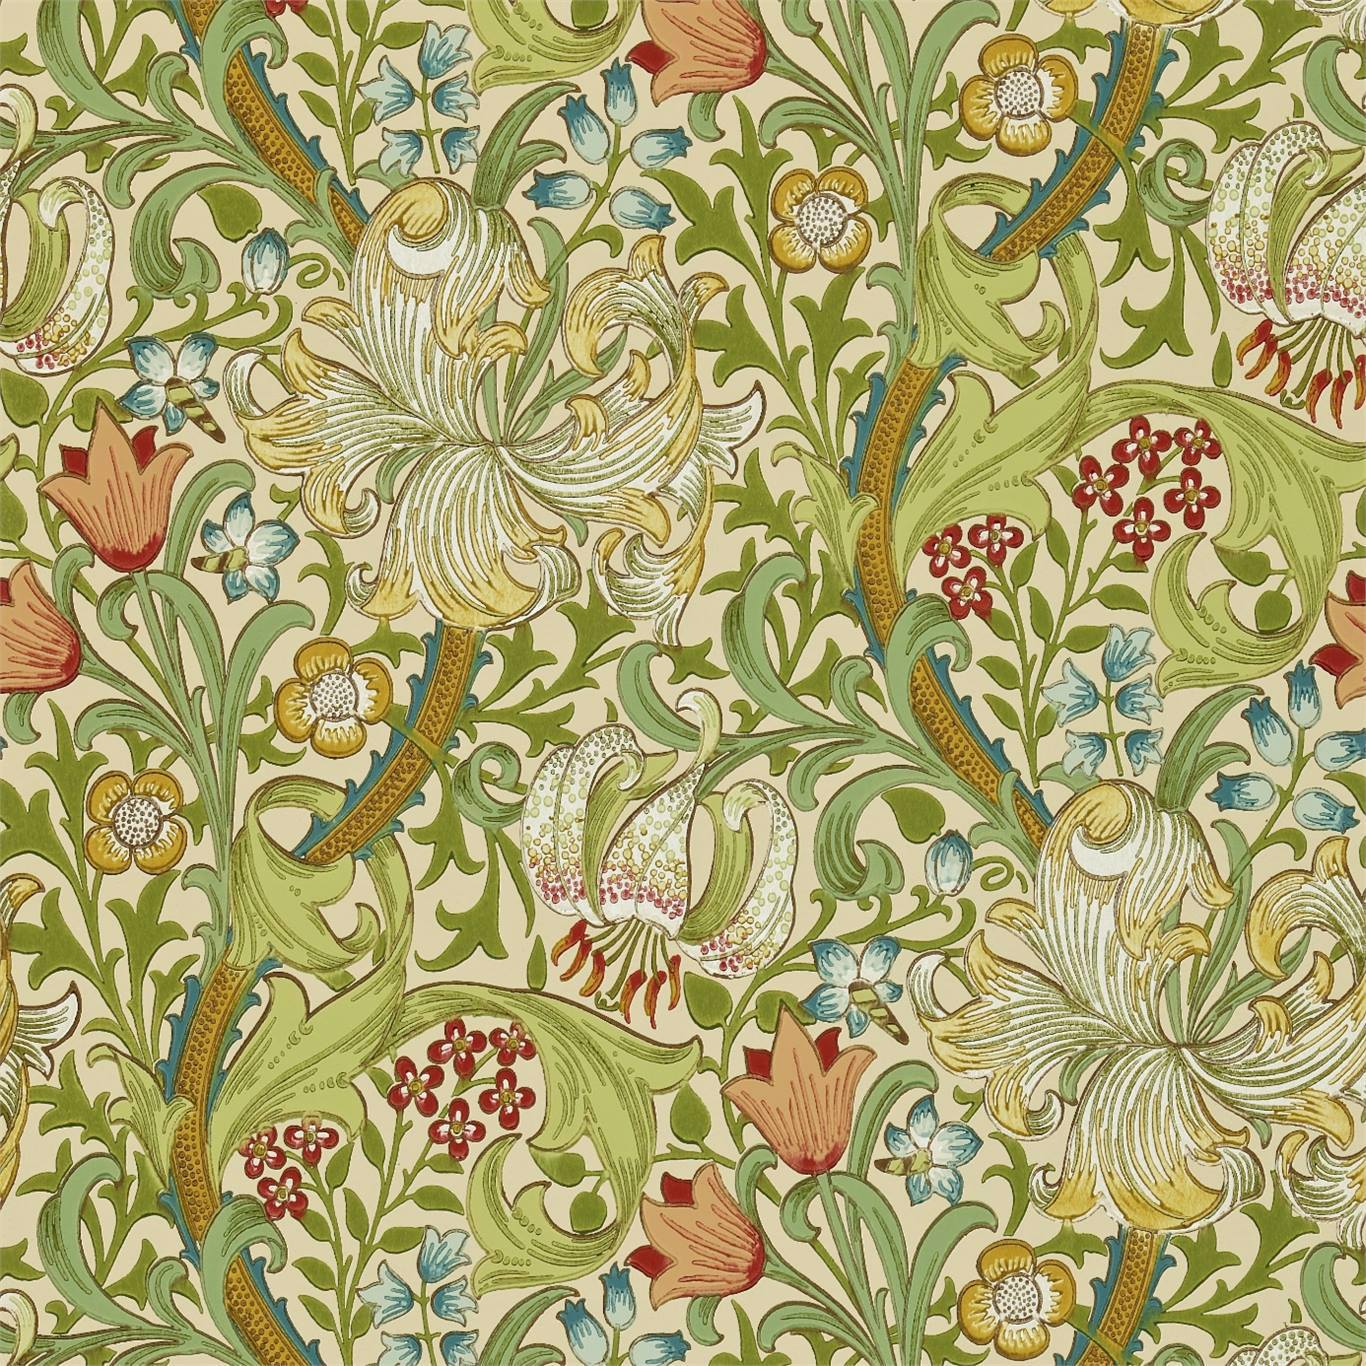 Golden Lily Pale Biscuit Wallpaper DCMW216858 by Morris & Co